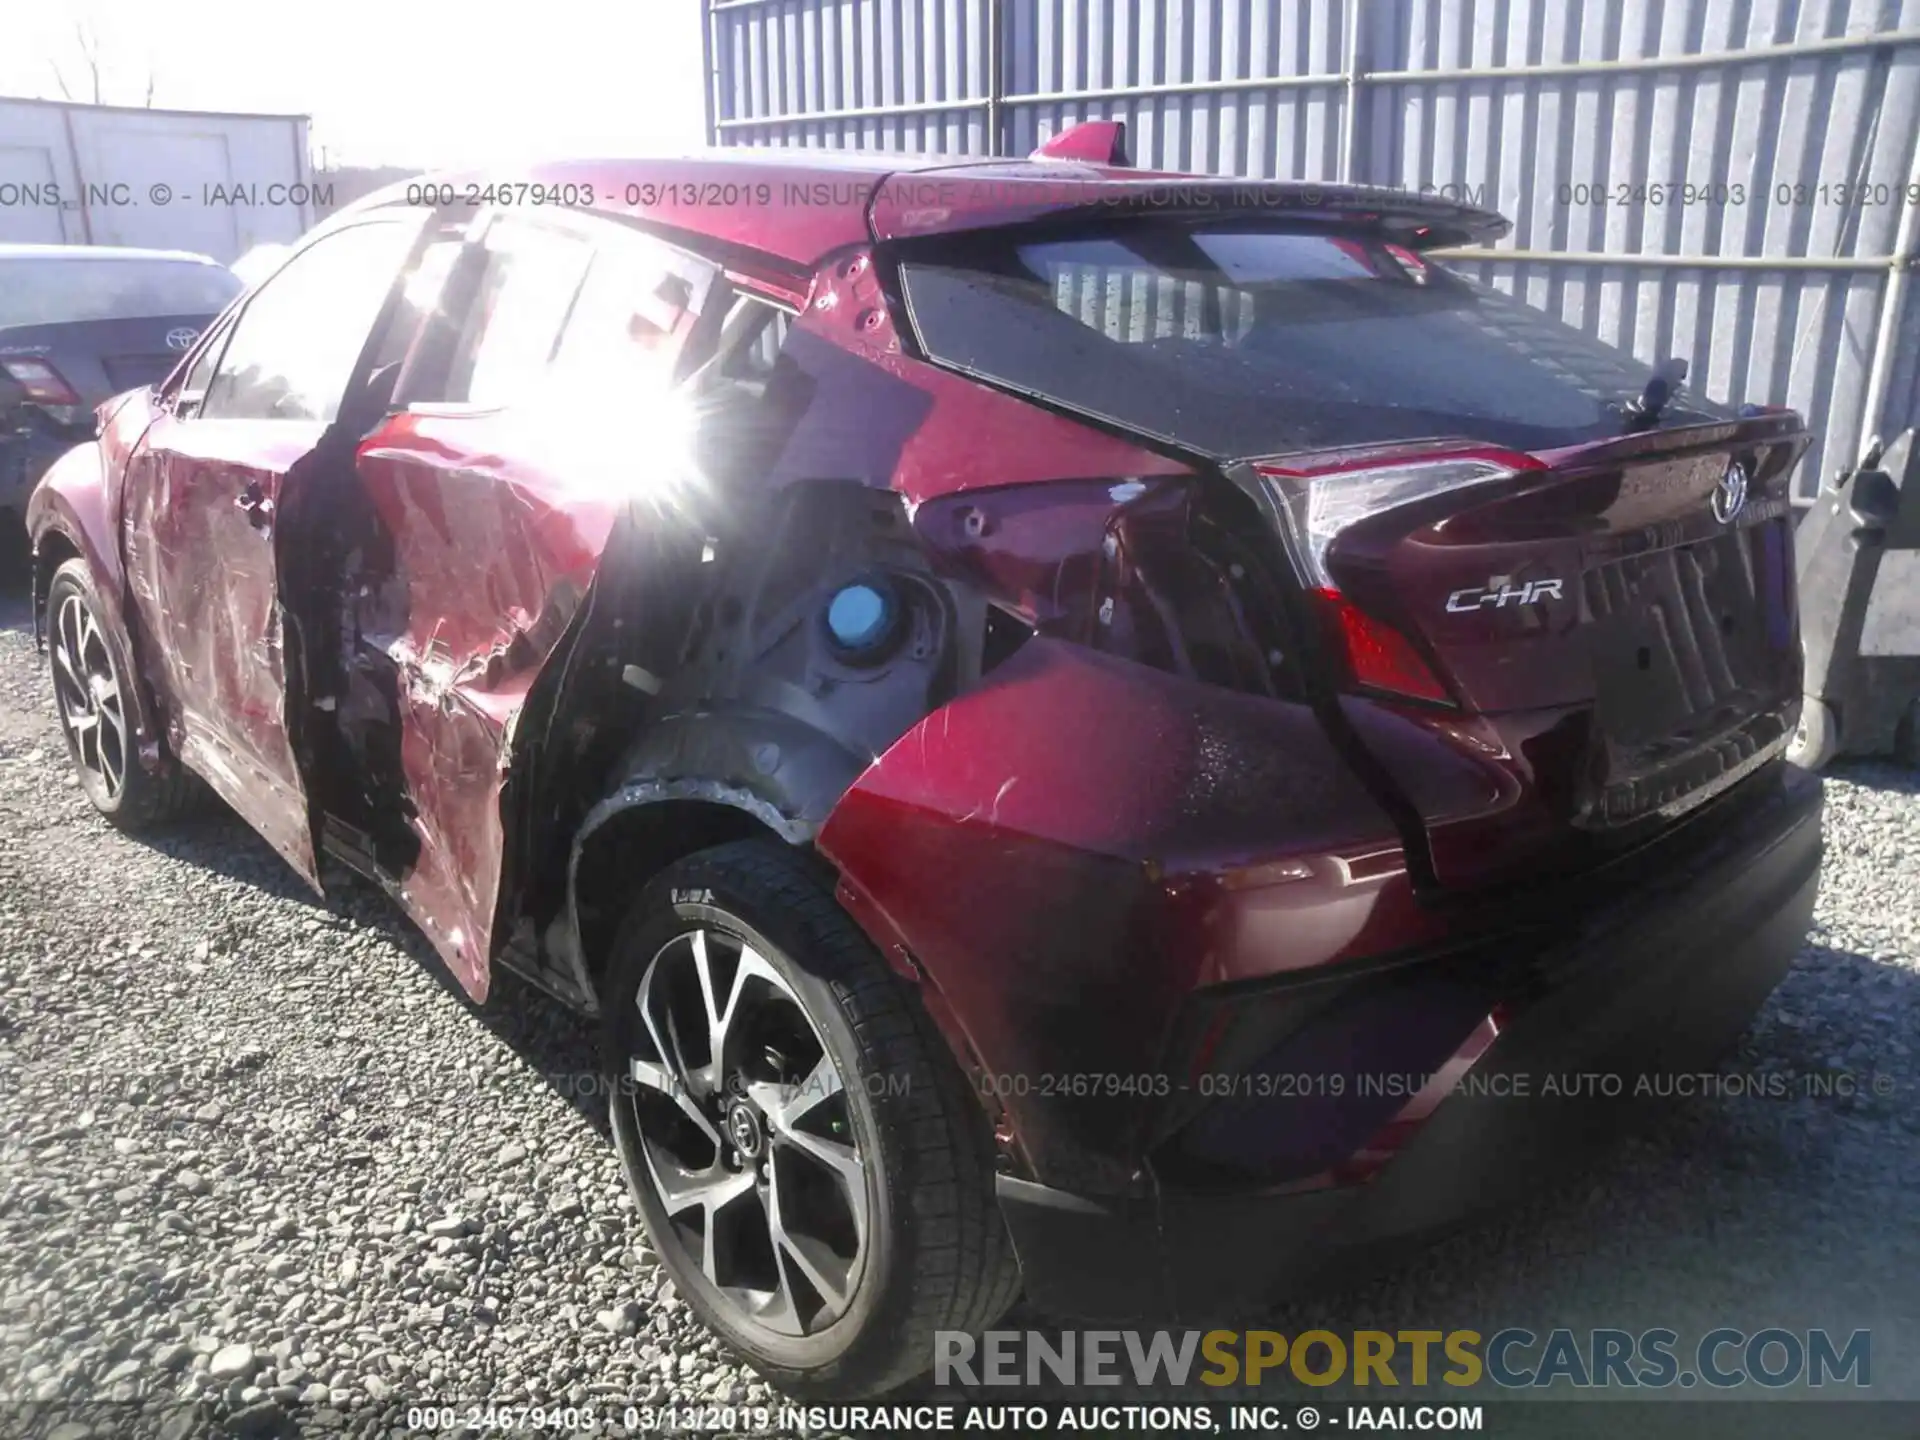 3 Photograph of a damaged car NMTKHMBXXKR081980 TOYOTA C-HR 2019